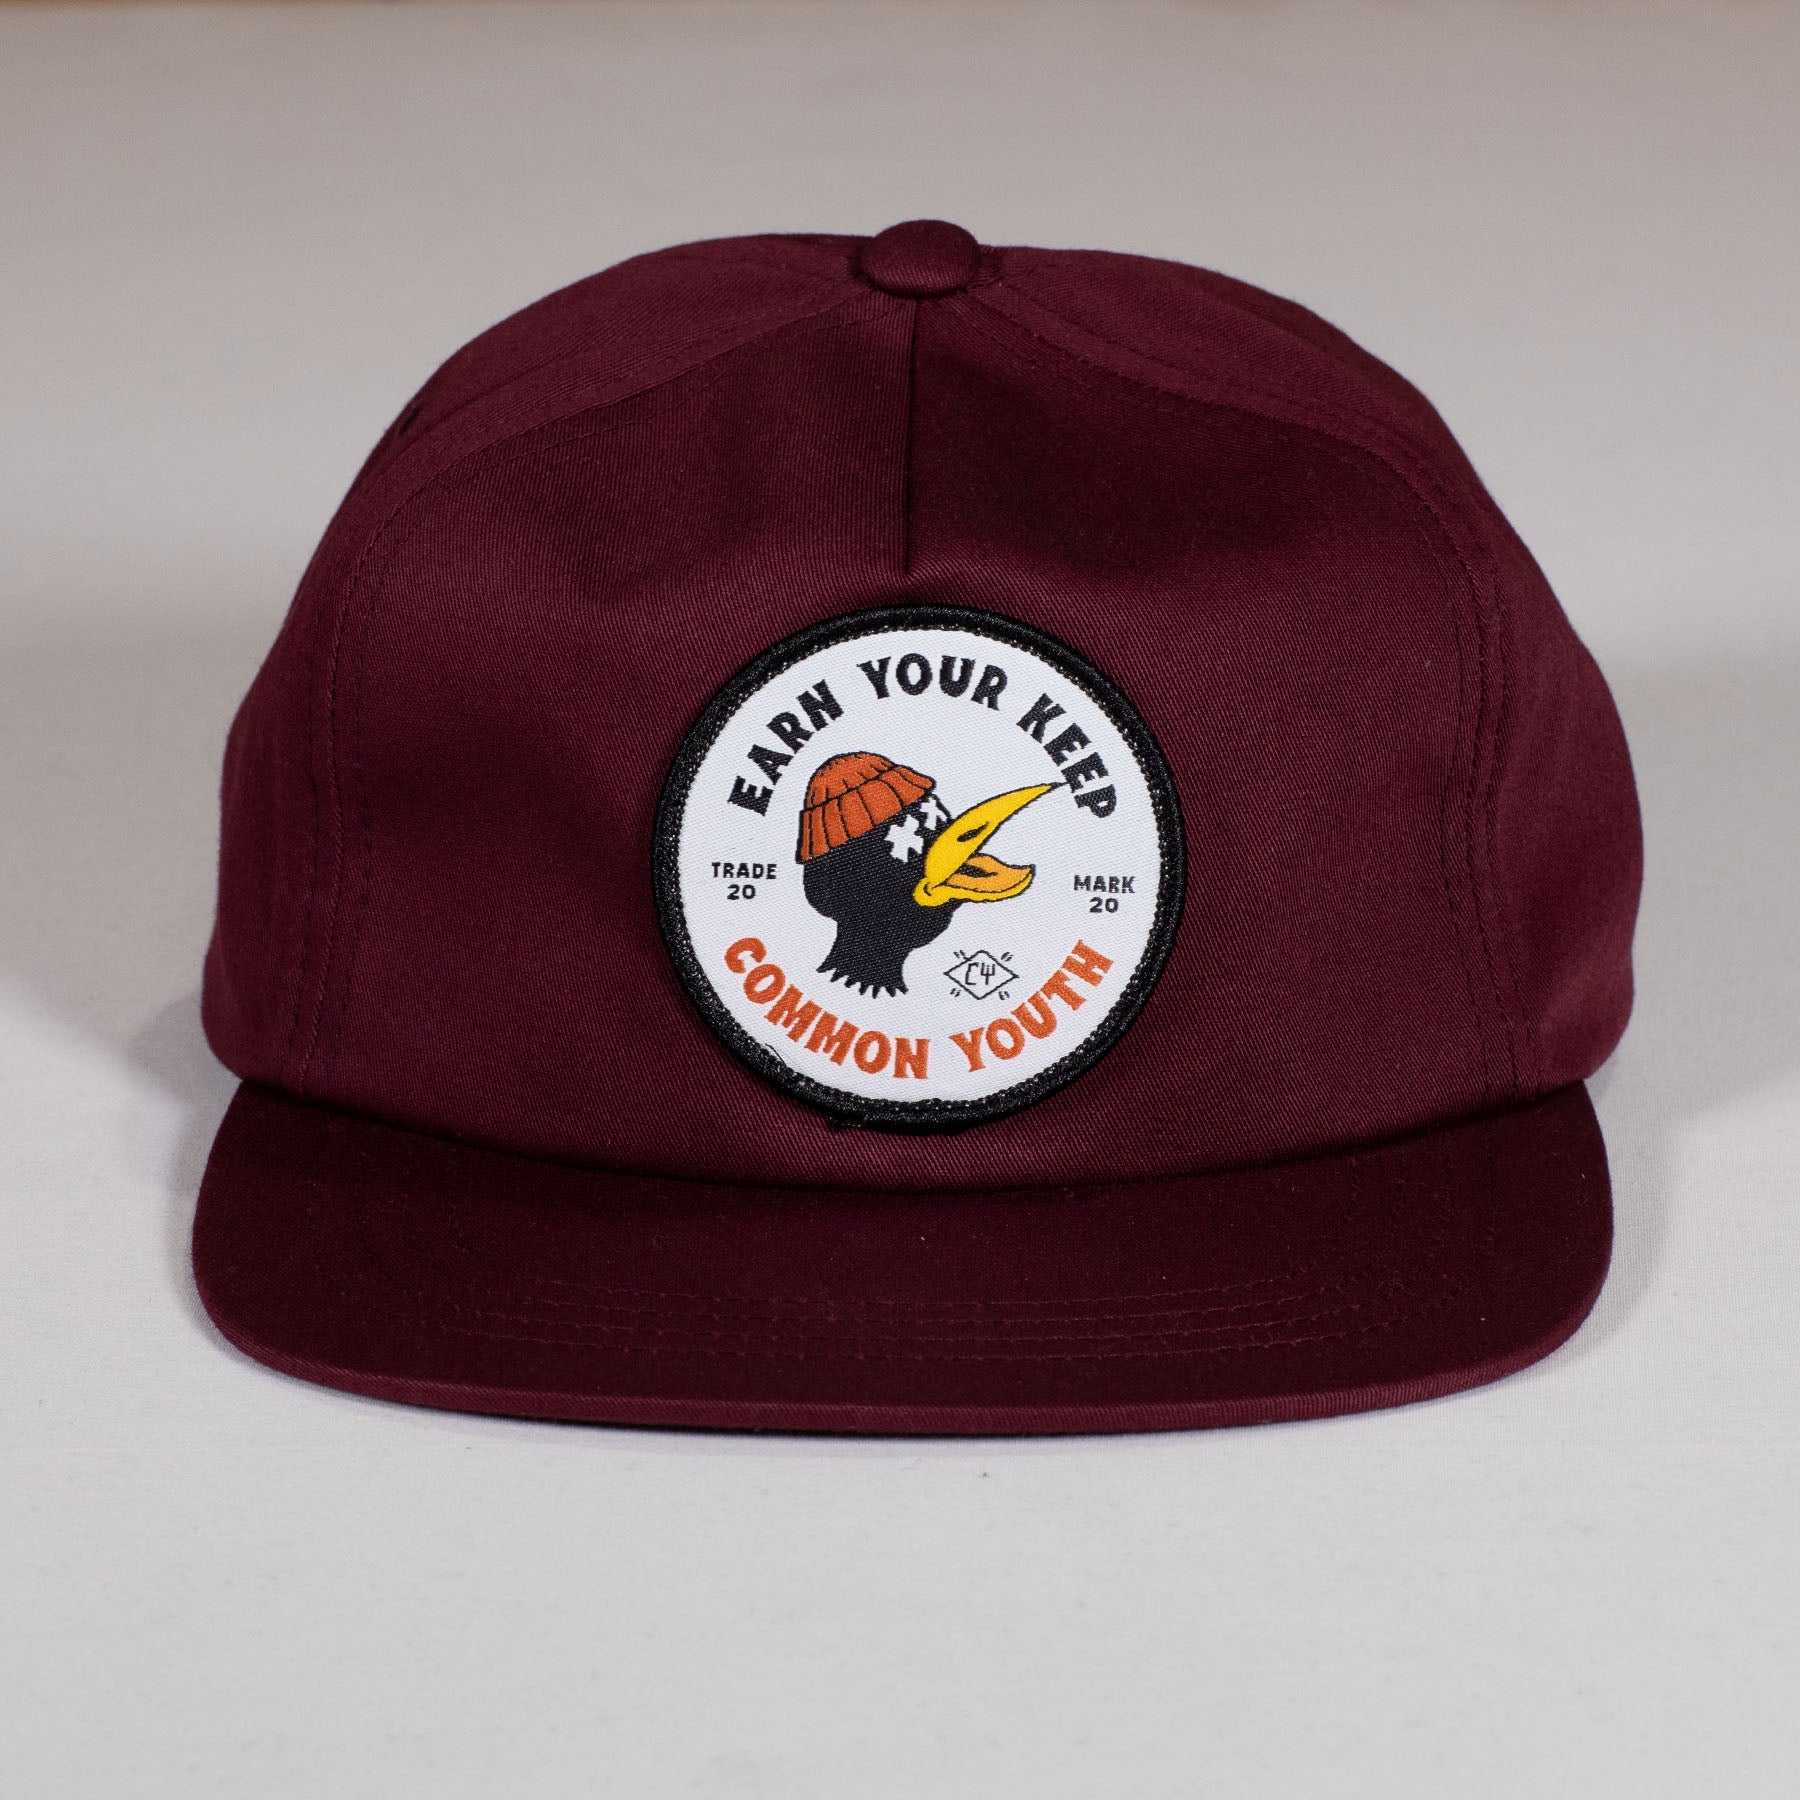 EARNED CAP - commonyouthbrand